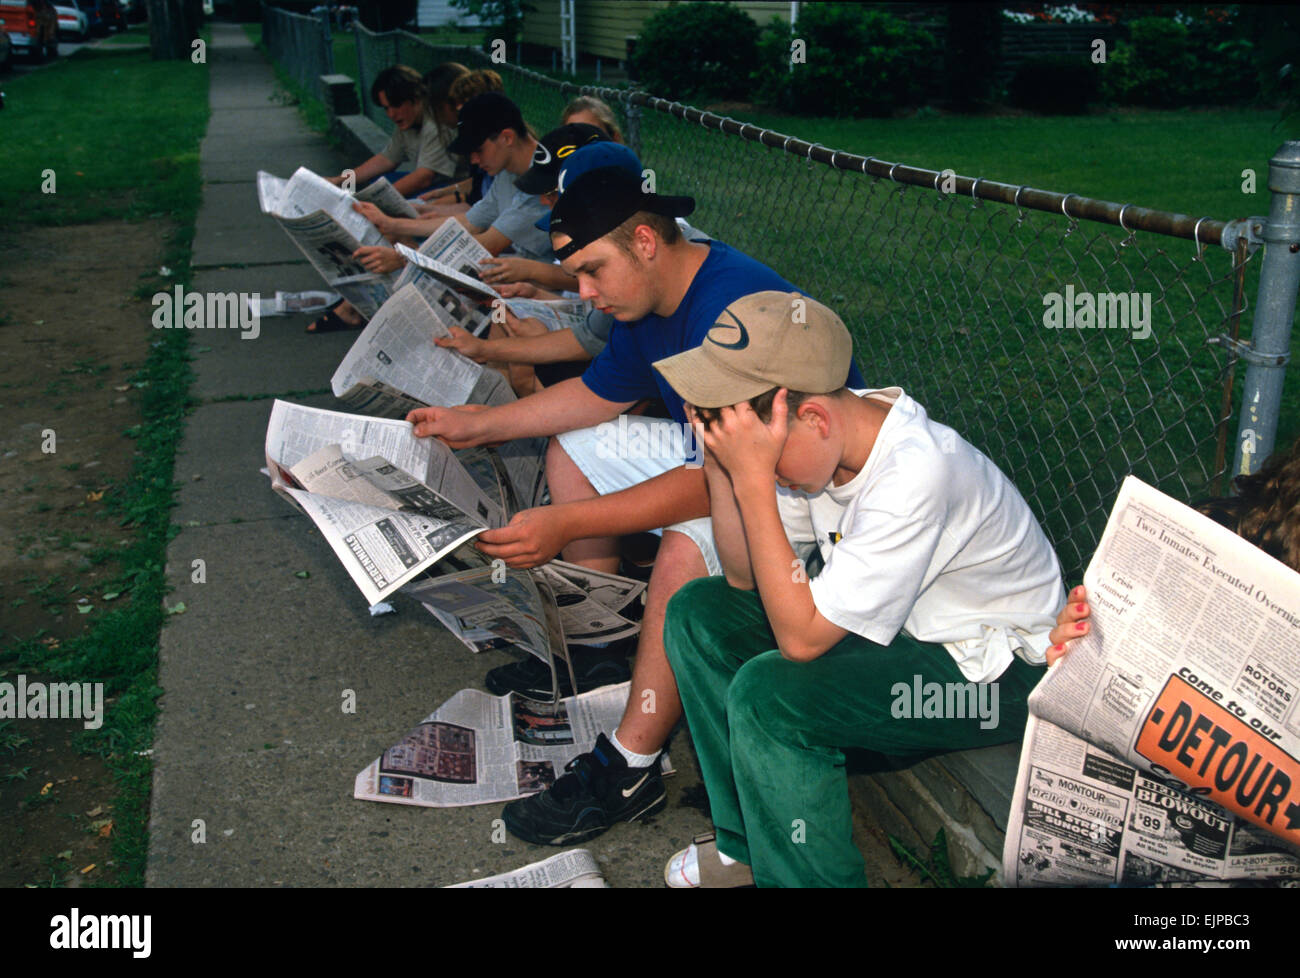 Students mourn their friends killed aboard TWA Airlines Flight 800 as they read news reports of the tragedy July 18, 1996 in Montoursville, PA. TWA Flight 800 exploded off East Moriches, NY with the loss of 230 lives including 21 students from the town. Stock Photo